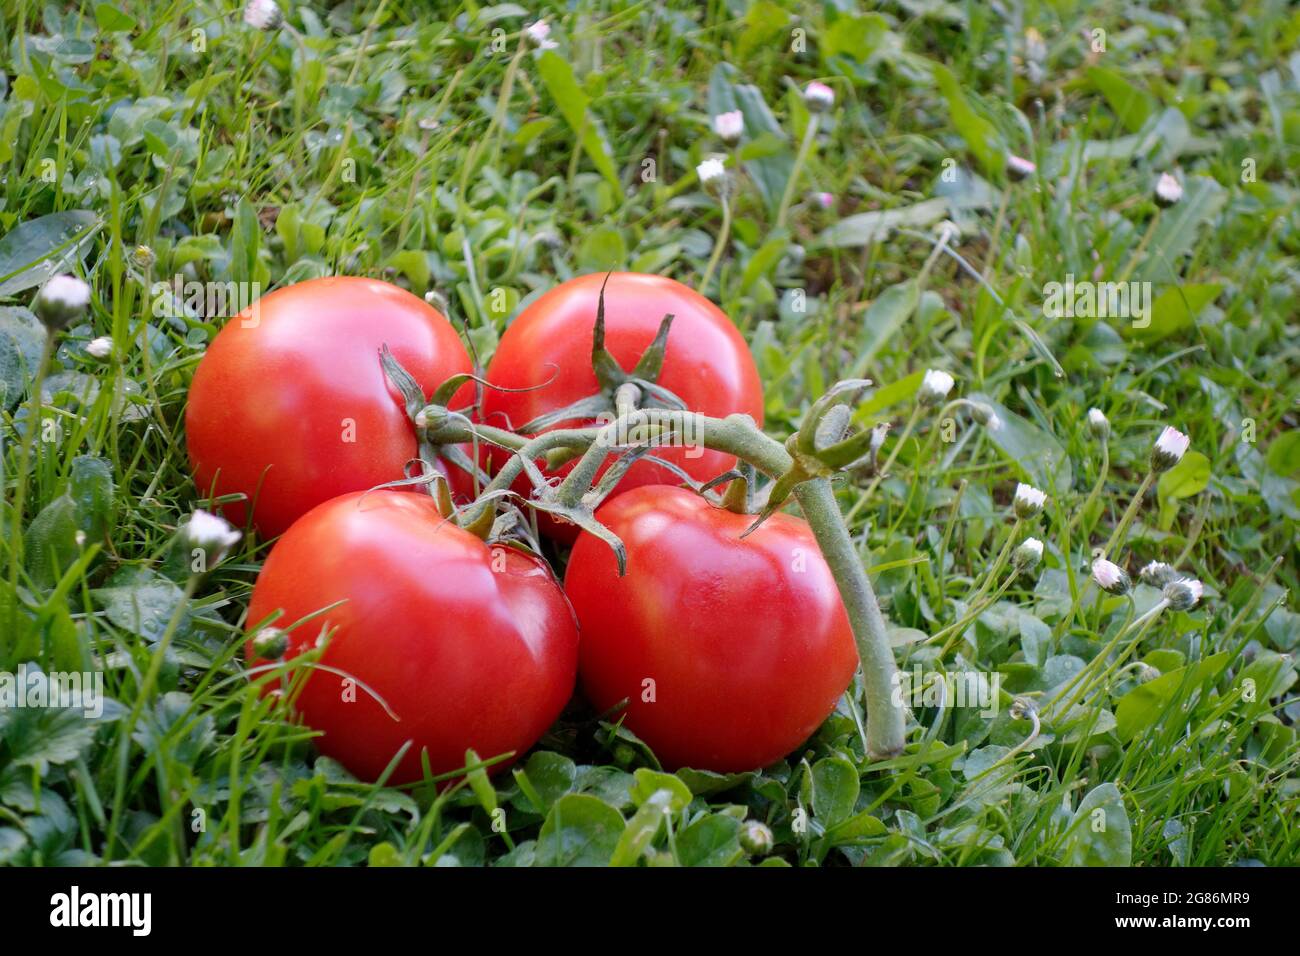 Tomatoes on green grass Stock Photo